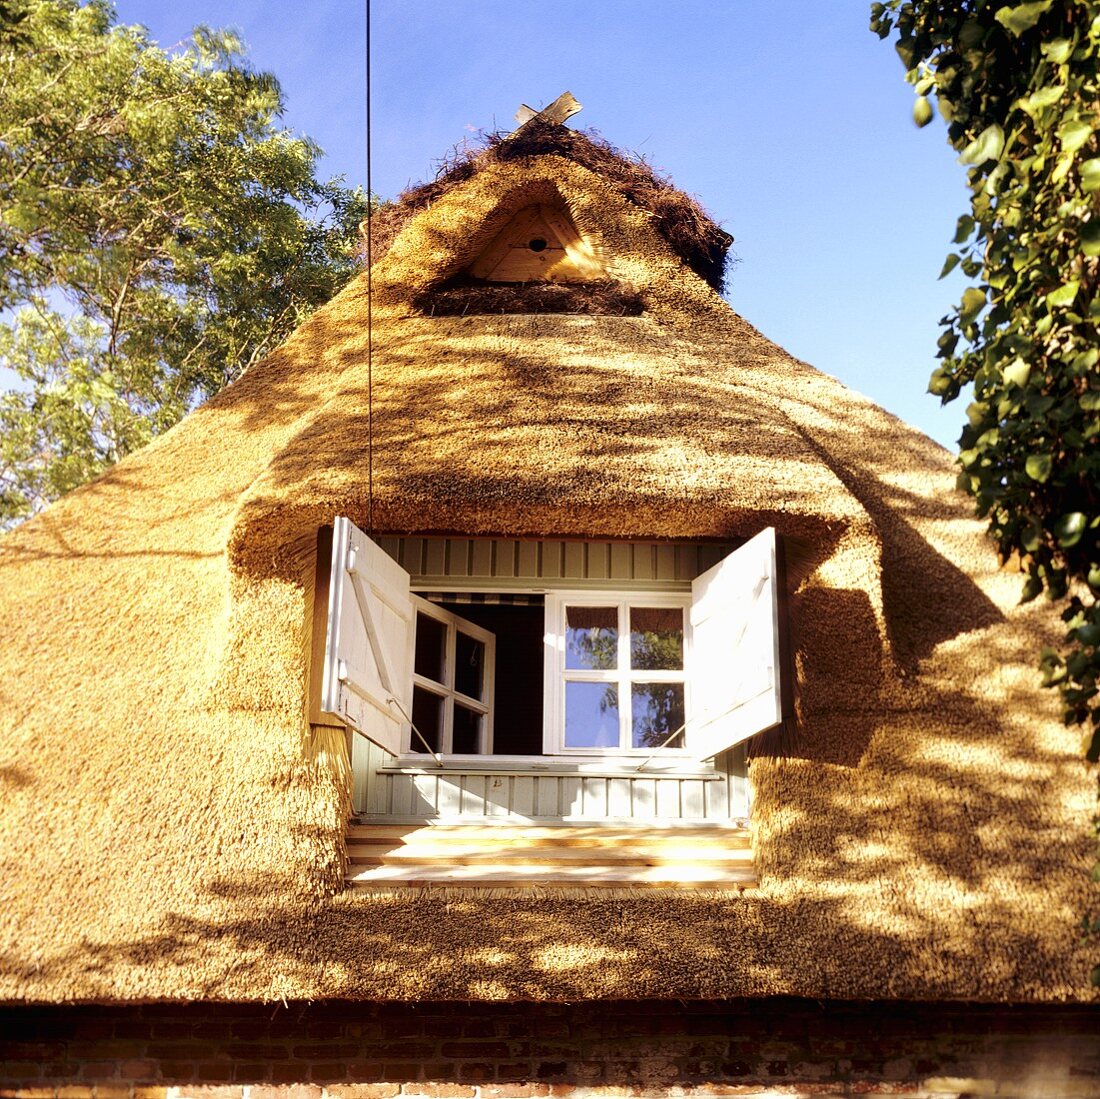 A roof window in a 19th century German thatched-roof house